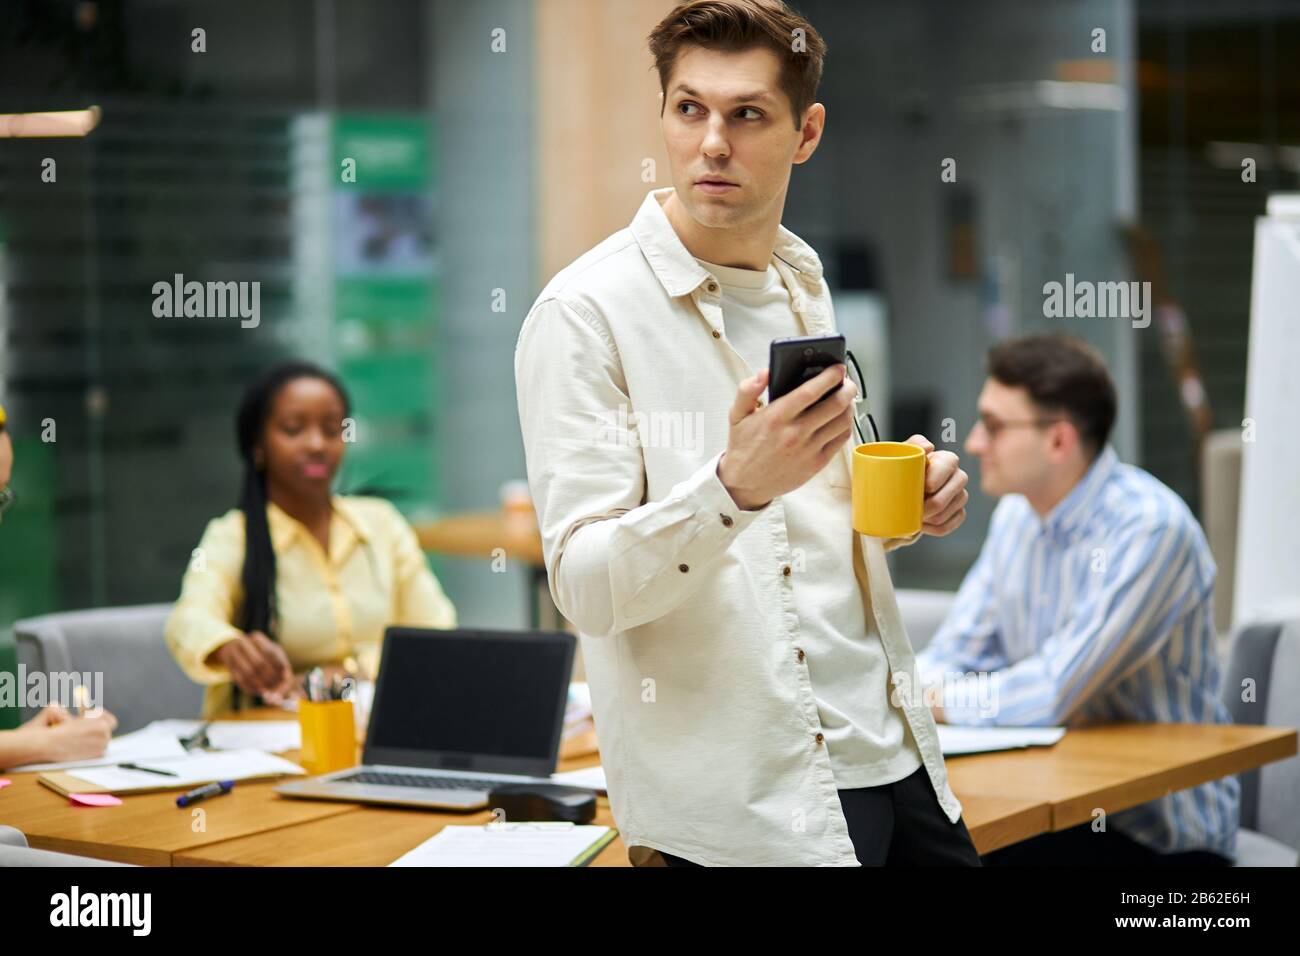 handsome serious man holding smart phone, cup of tea, going to make a phone call, blurred background, free time, spare time, lifestyle Stock Photo